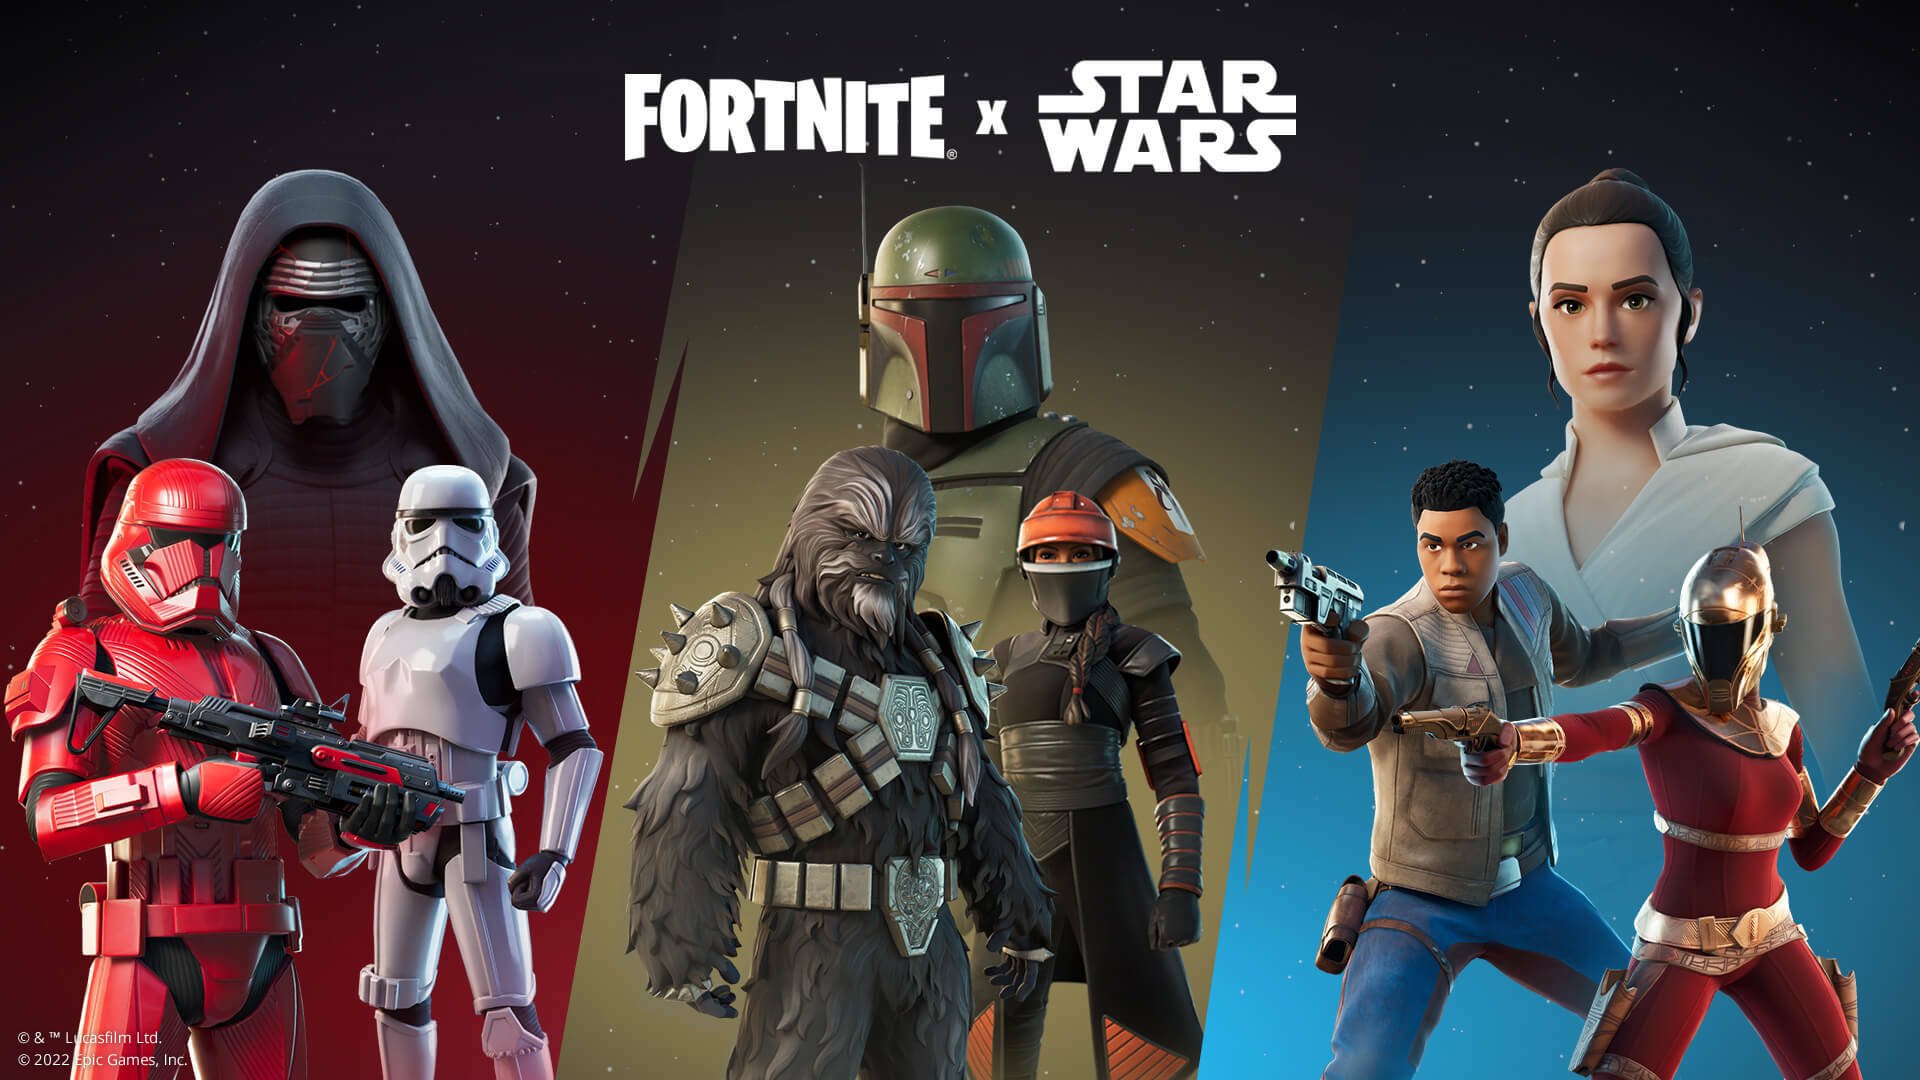 "Fortnite" art featuring three Star Wars collaborations tied to "The Book of Boba Fett" and the Star Wars Sequel Trilogy.